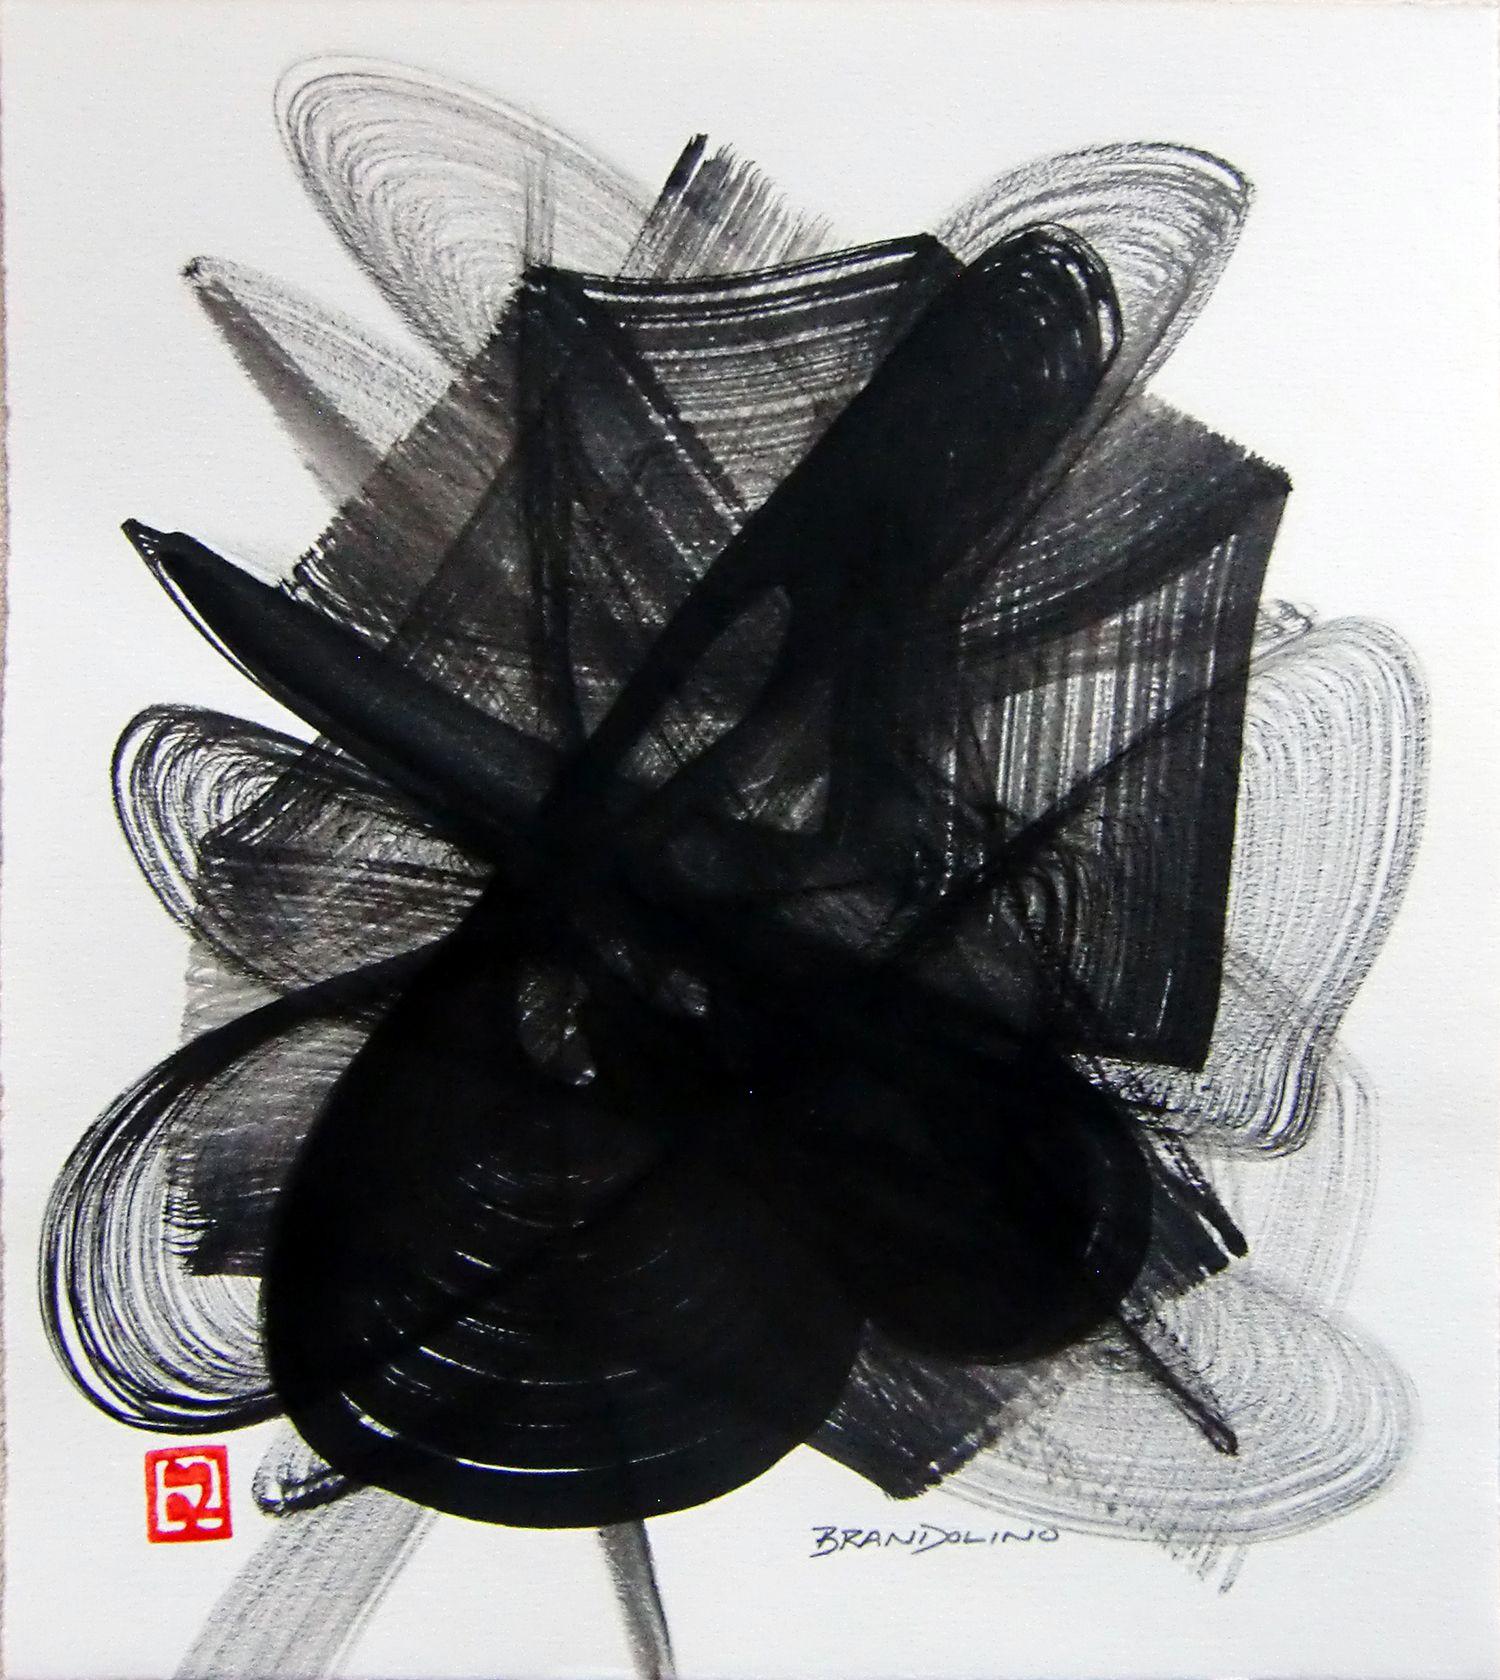 Ray Brandolino Abstract Drawing - Brush Dance Series No. 09, Drawing, Pen & Ink on Paper